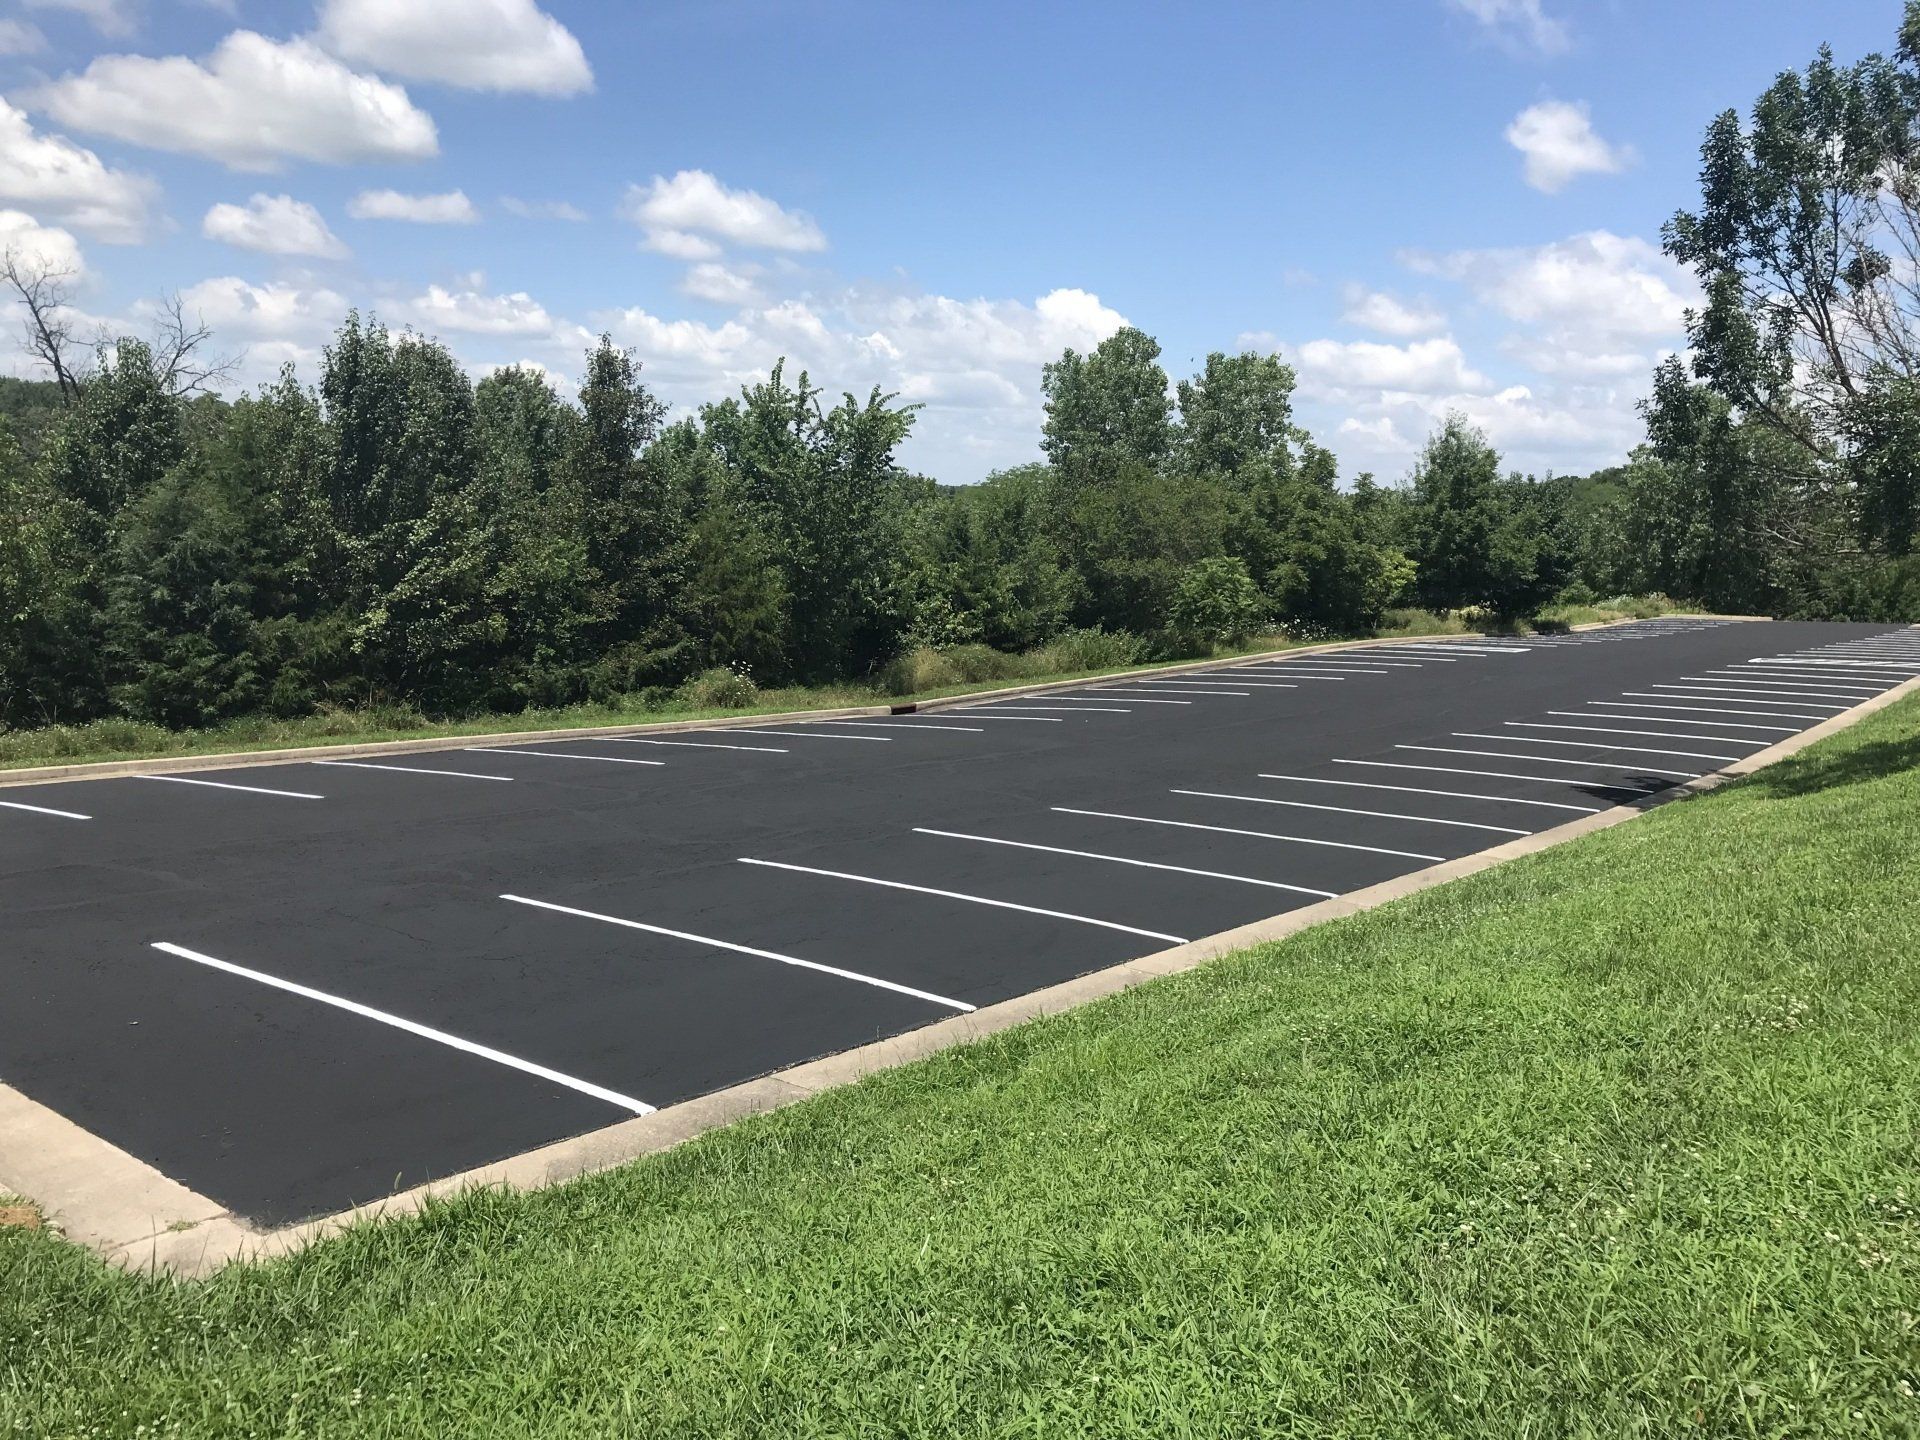 Get the Top-Notch Commercial Asphalt Service You Deserve From MoSEAL in Boonville, MO.